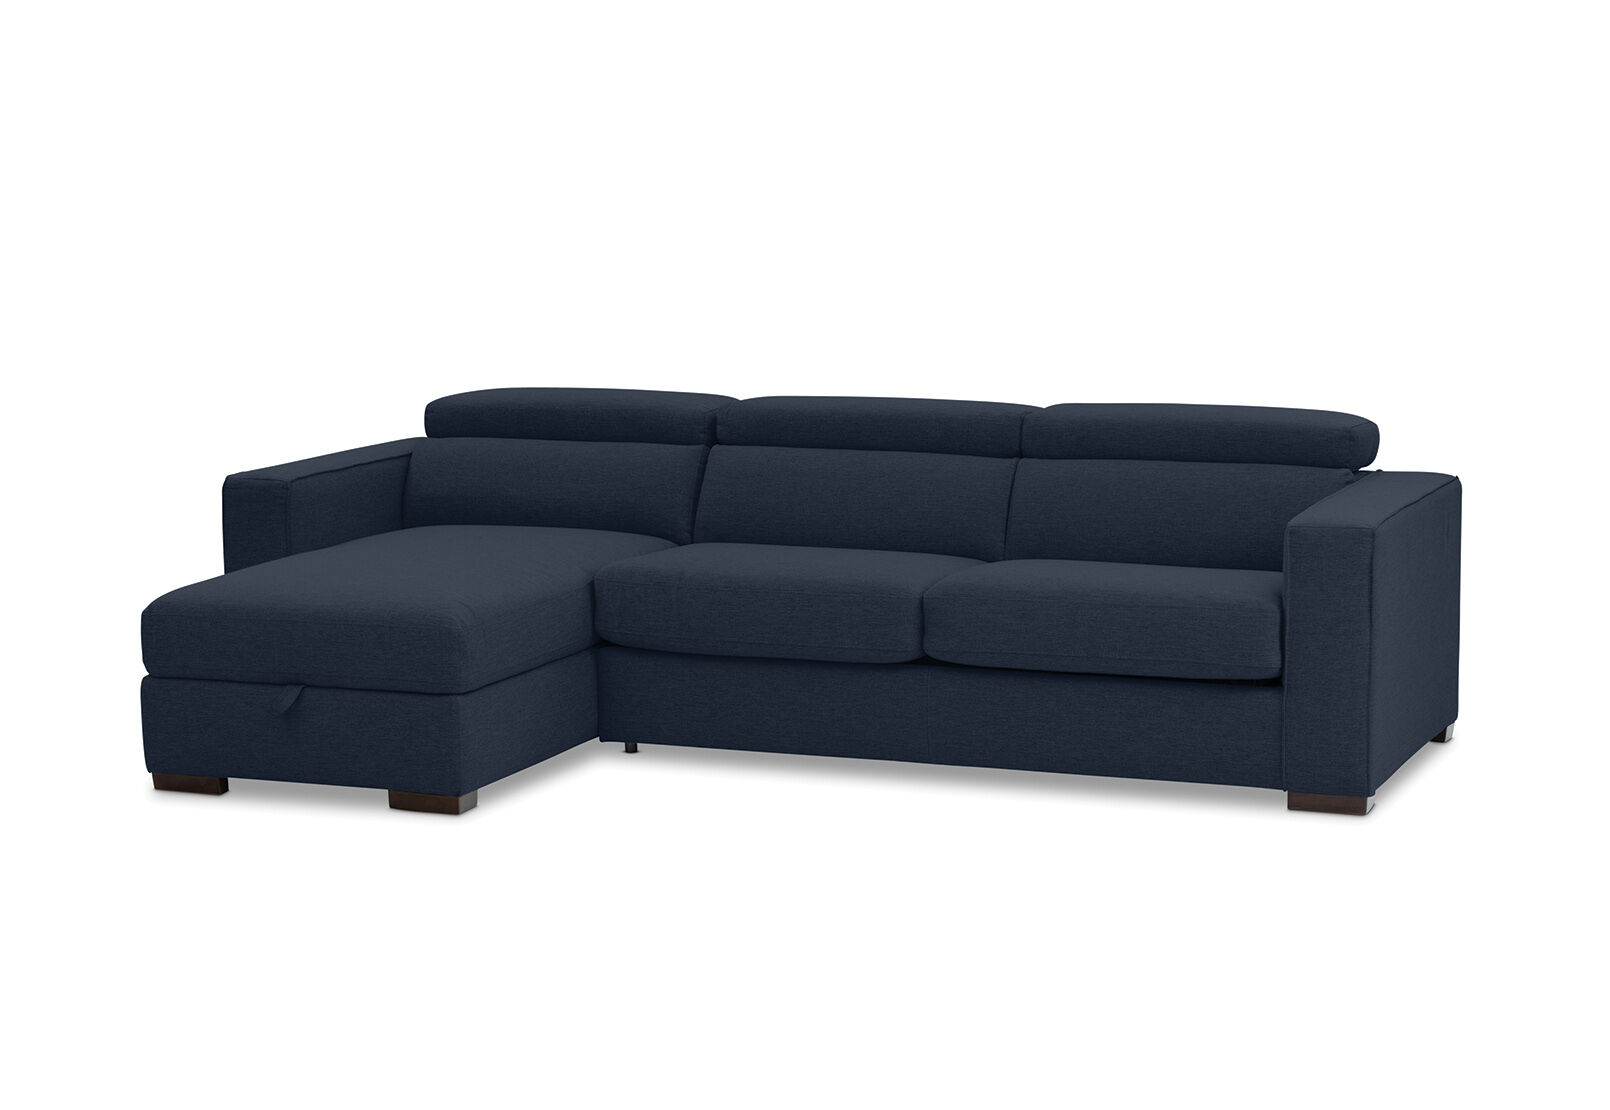 Sofa Bed Amart Furniture, How Much Fabric To Recover 3 Seater Sofa Beds